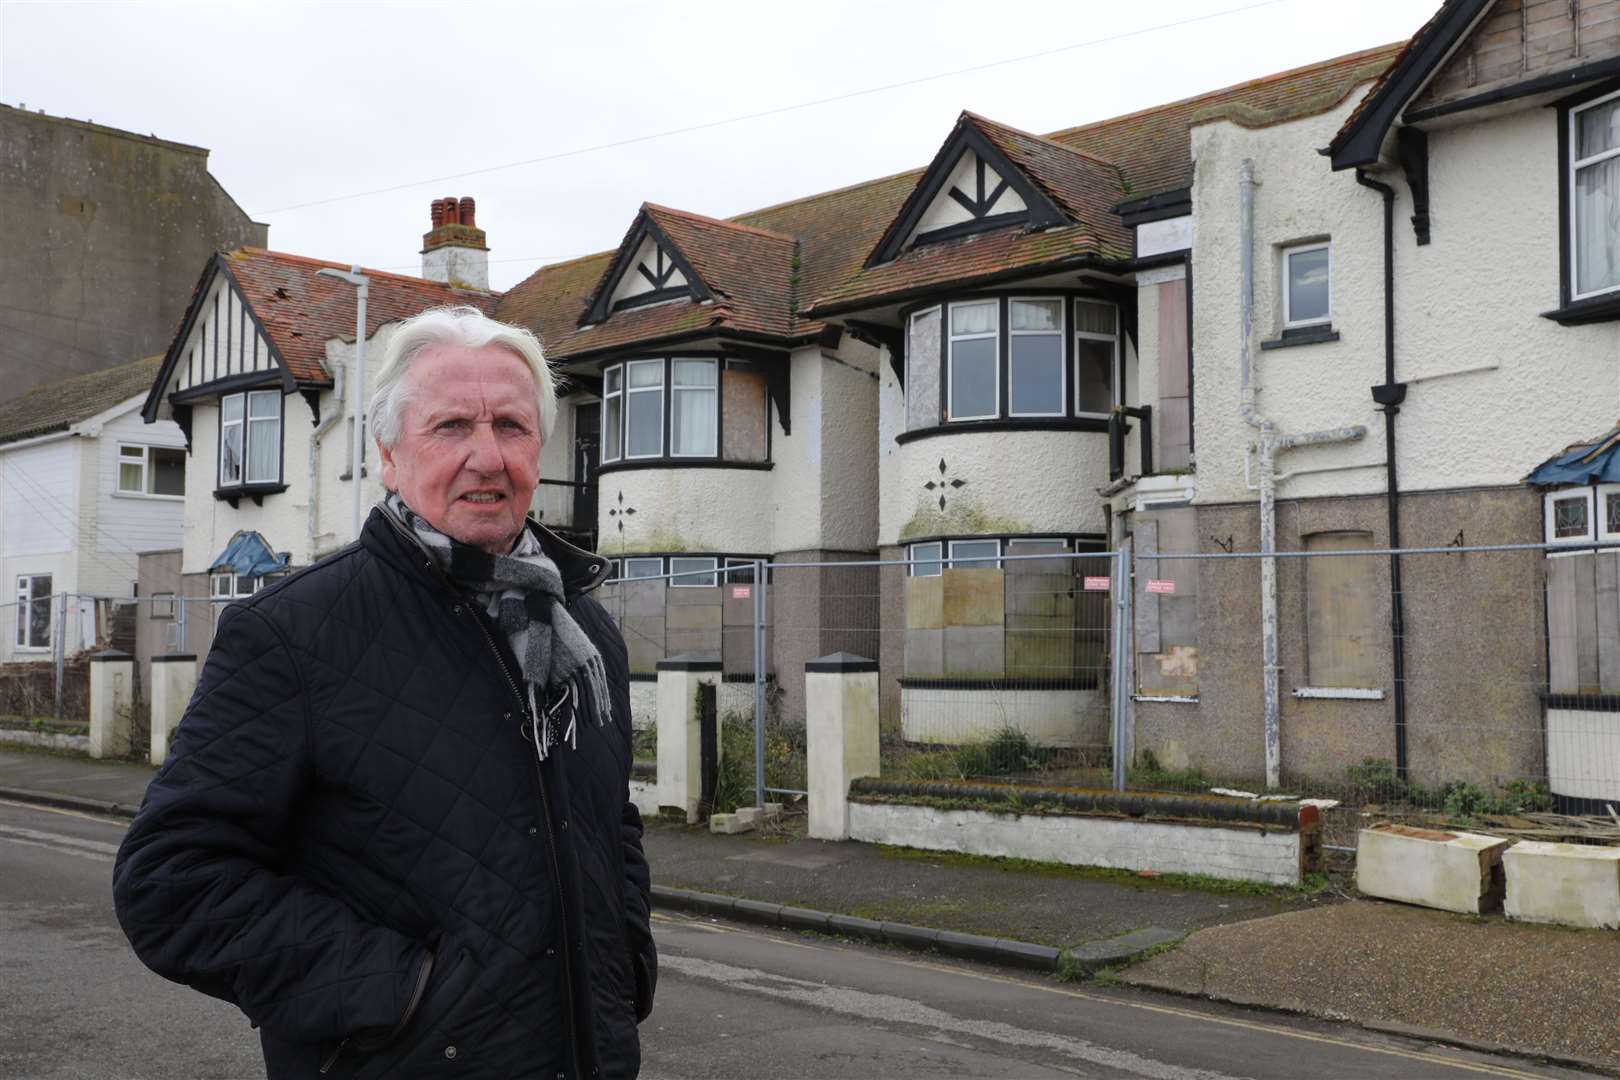 St George’s Terrace resident Hubert Whyte fears the scheme will create congestion along the narrow road